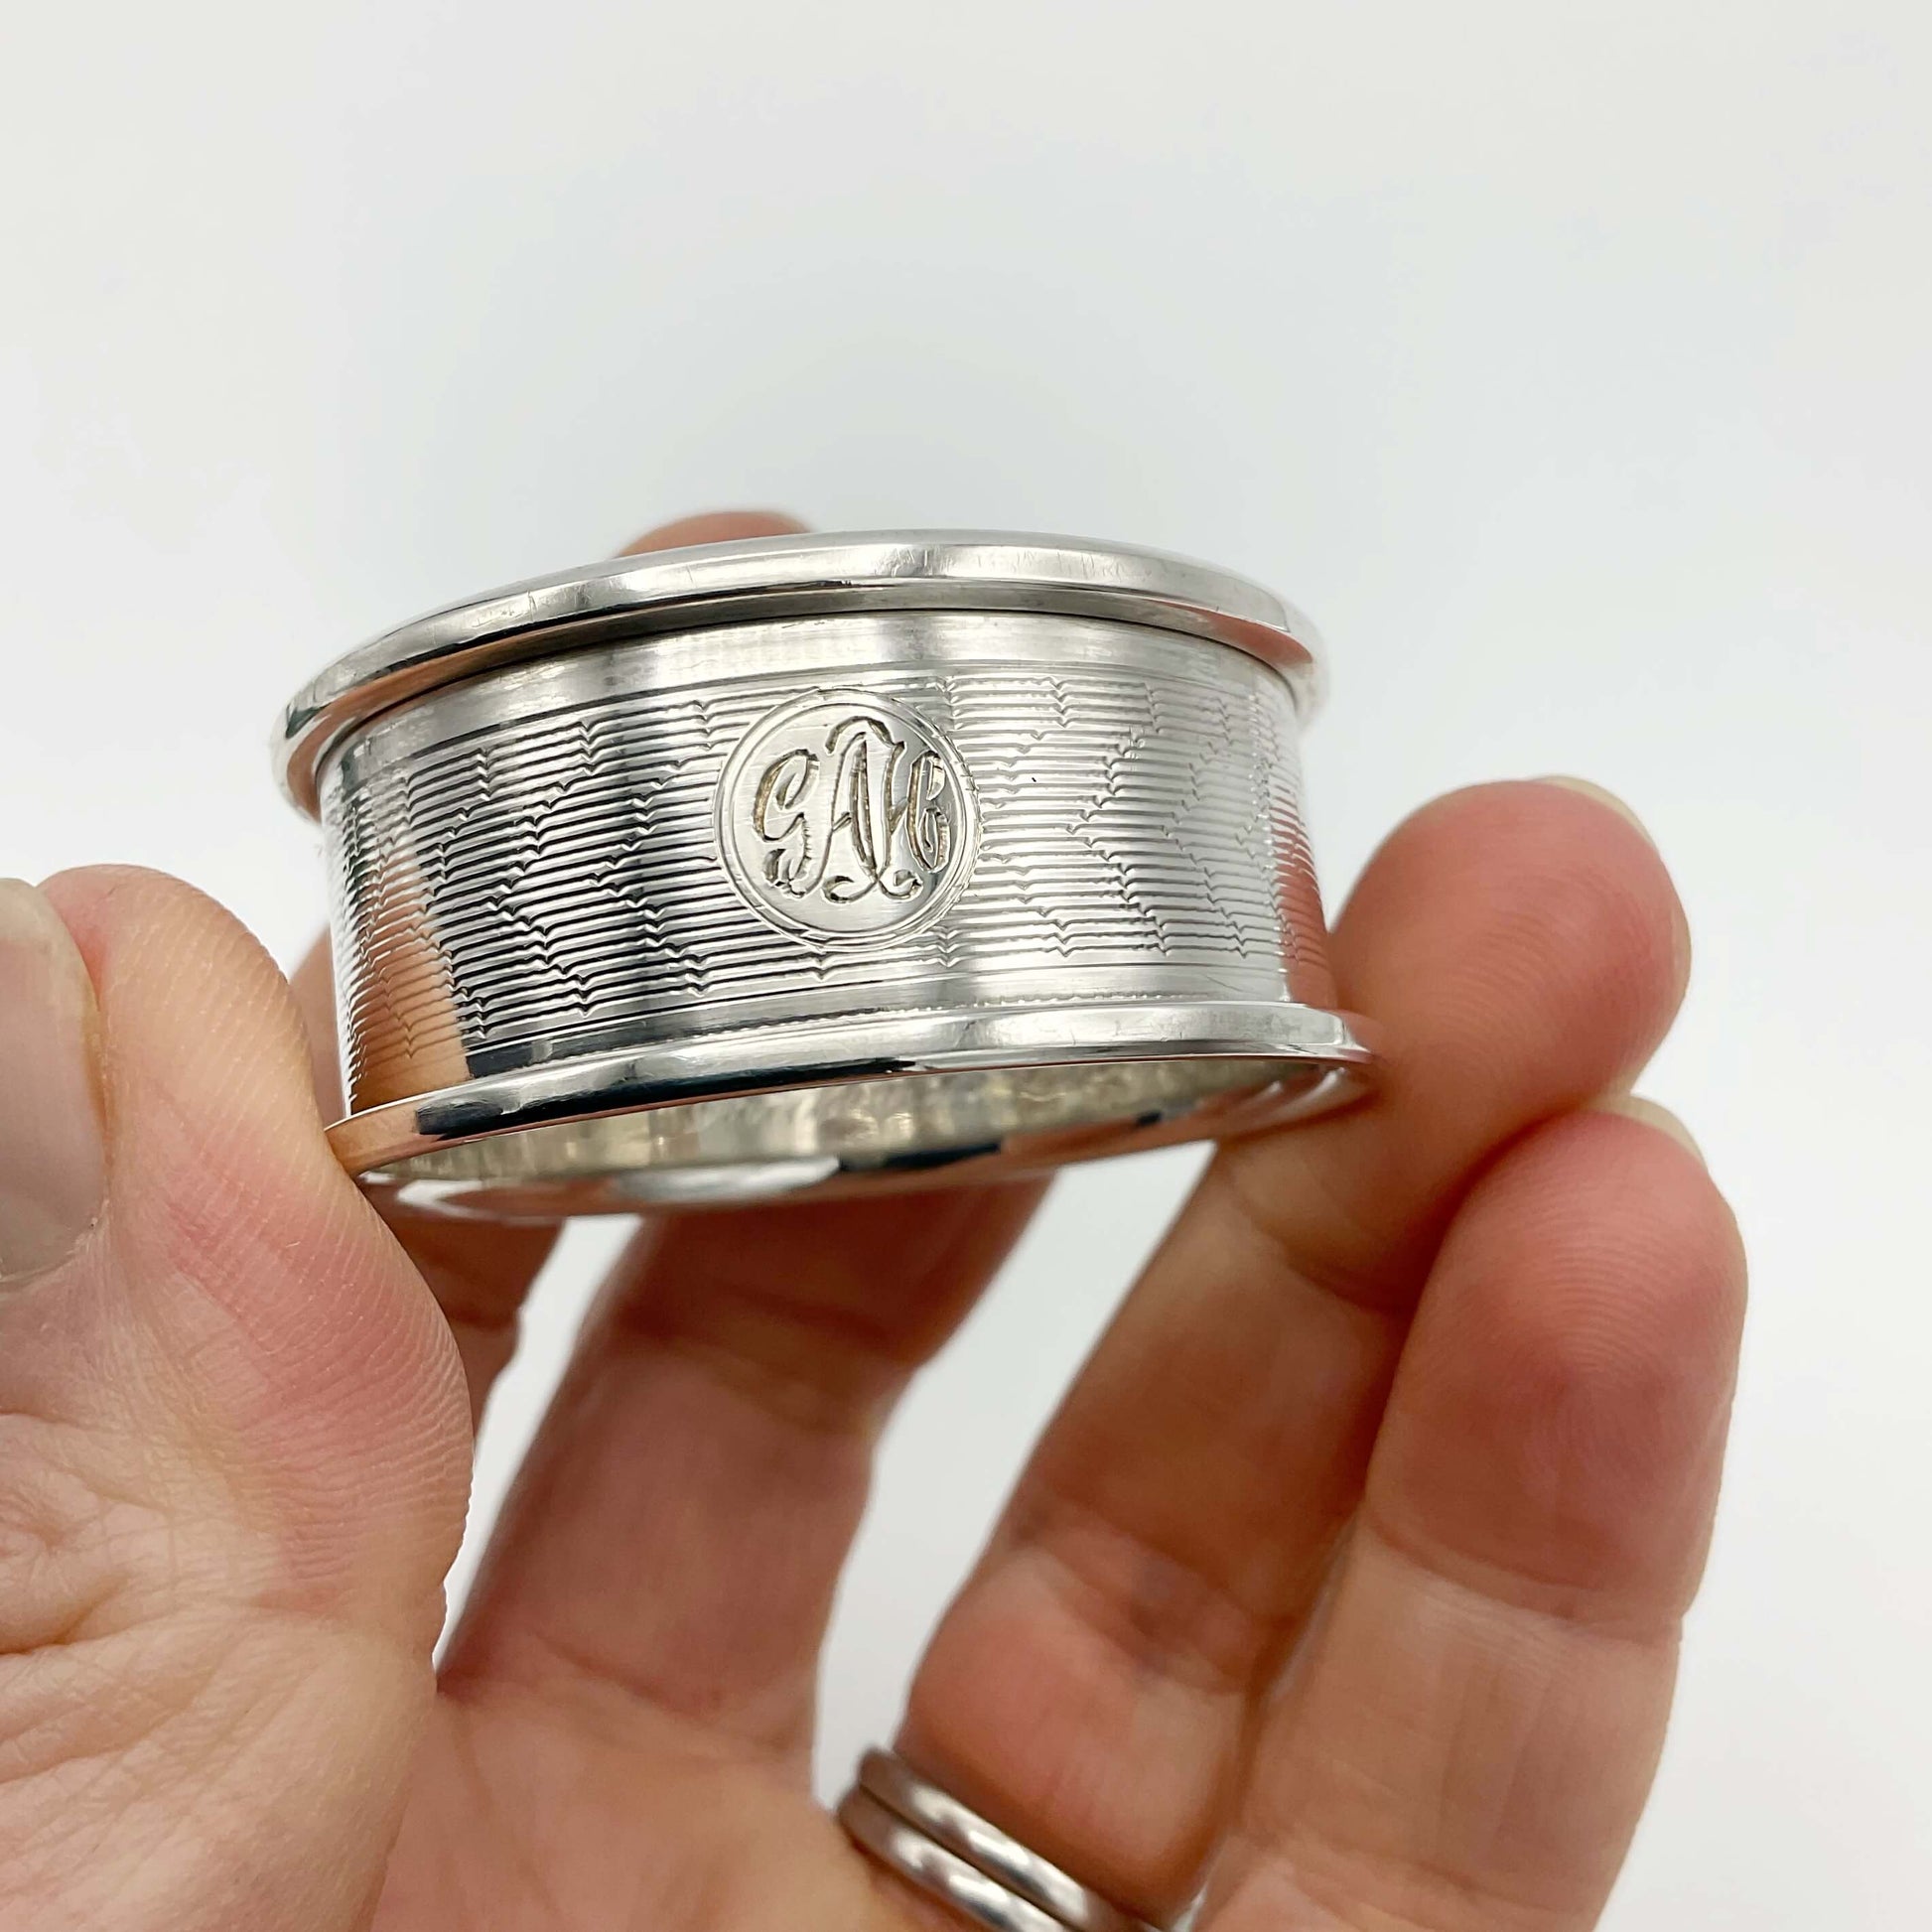 Silver napkin ring held in a hand